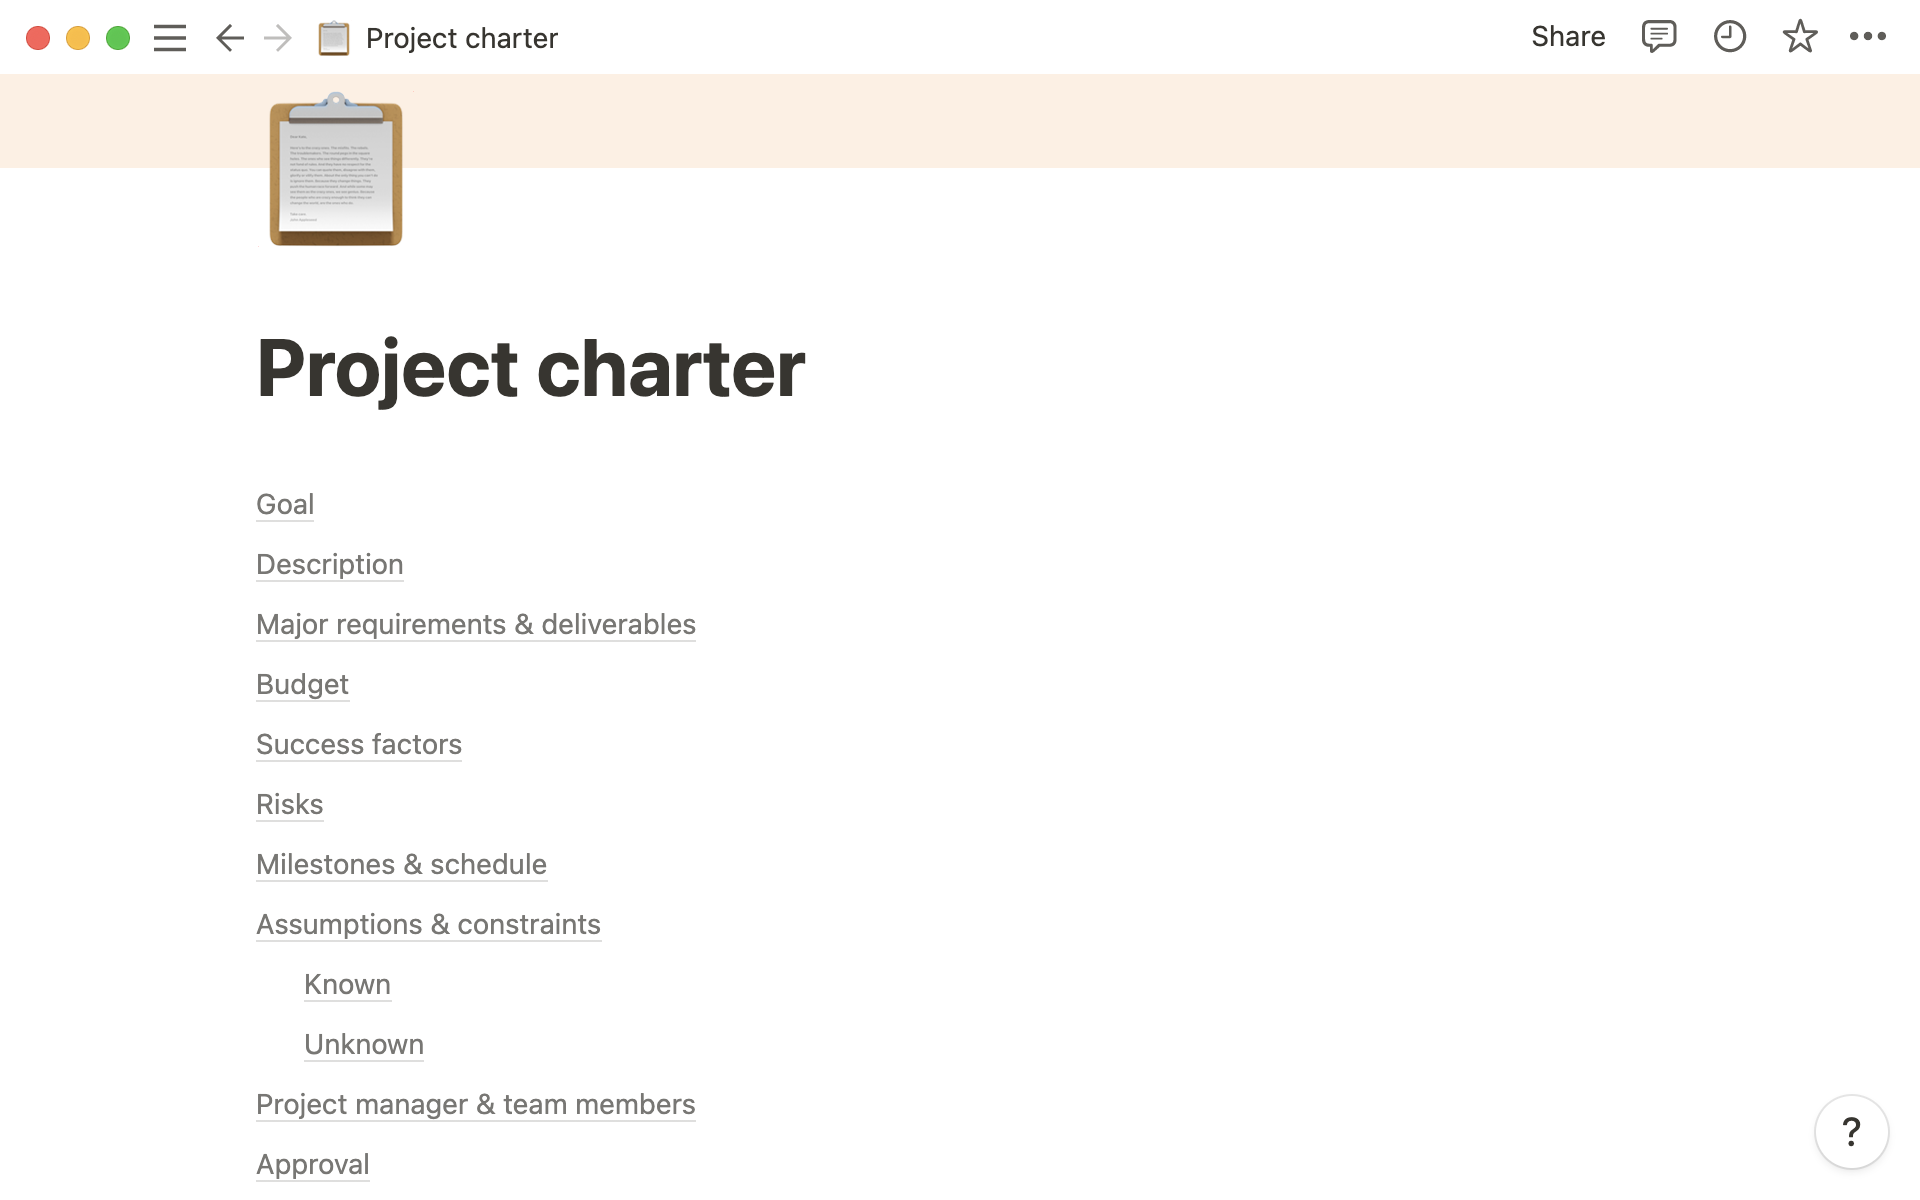 A table of contents you can use to navigate to different sections of your project charter.